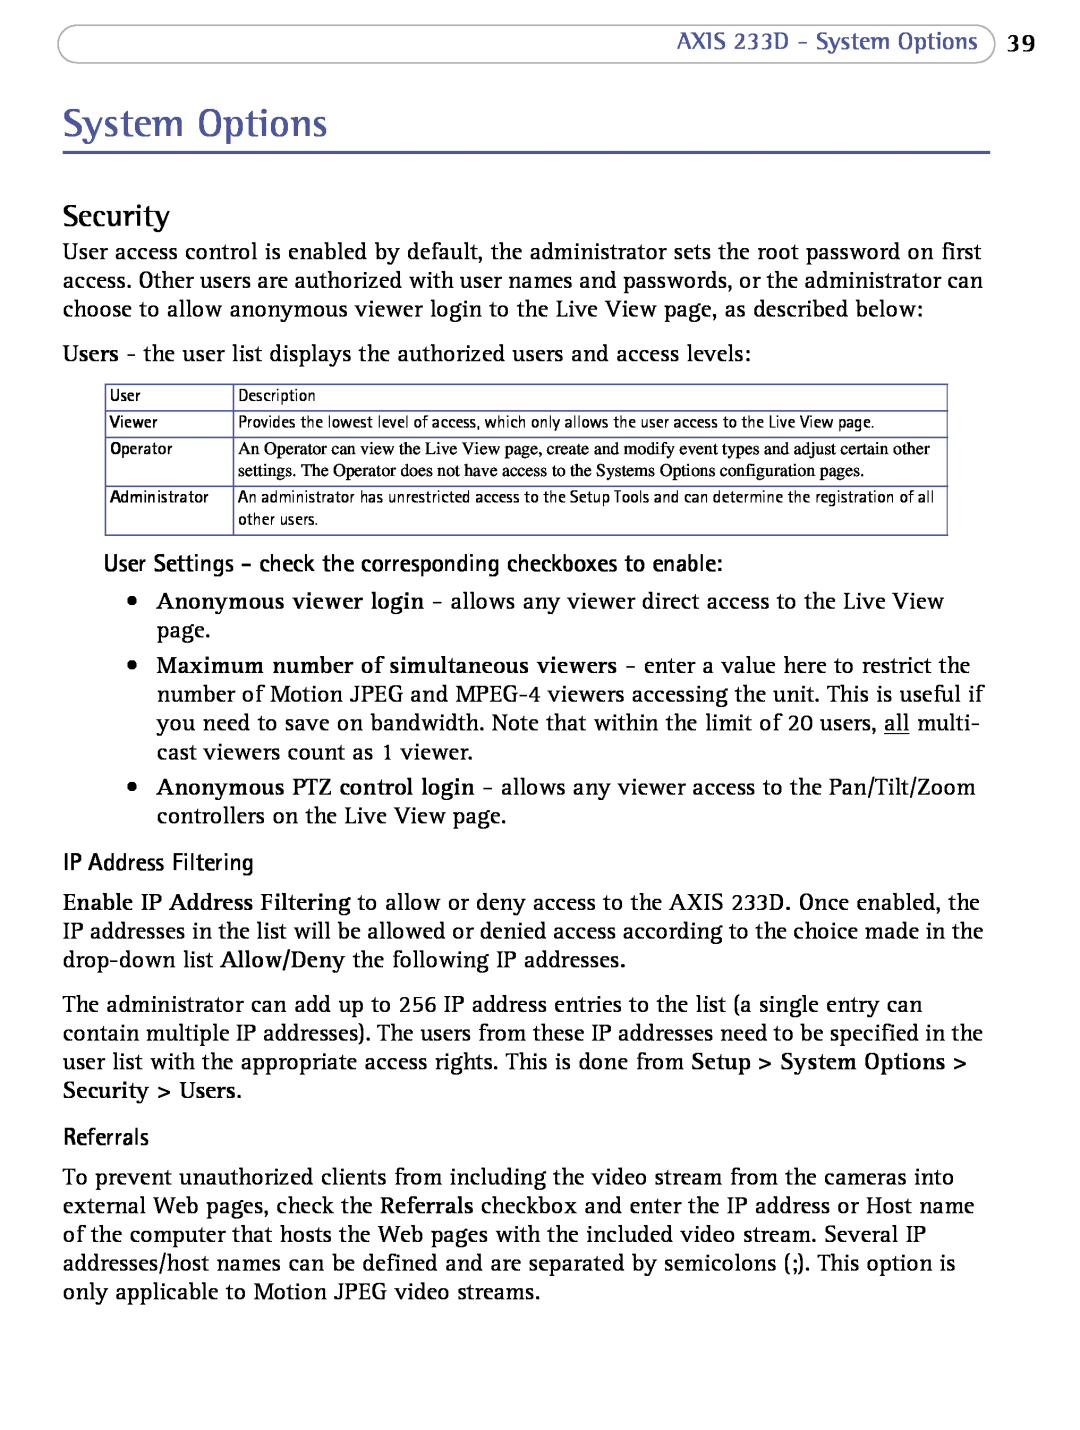 Axis Communications user manual Security, AXIS 233D - System Options, IP Address Filtering, Referrals 